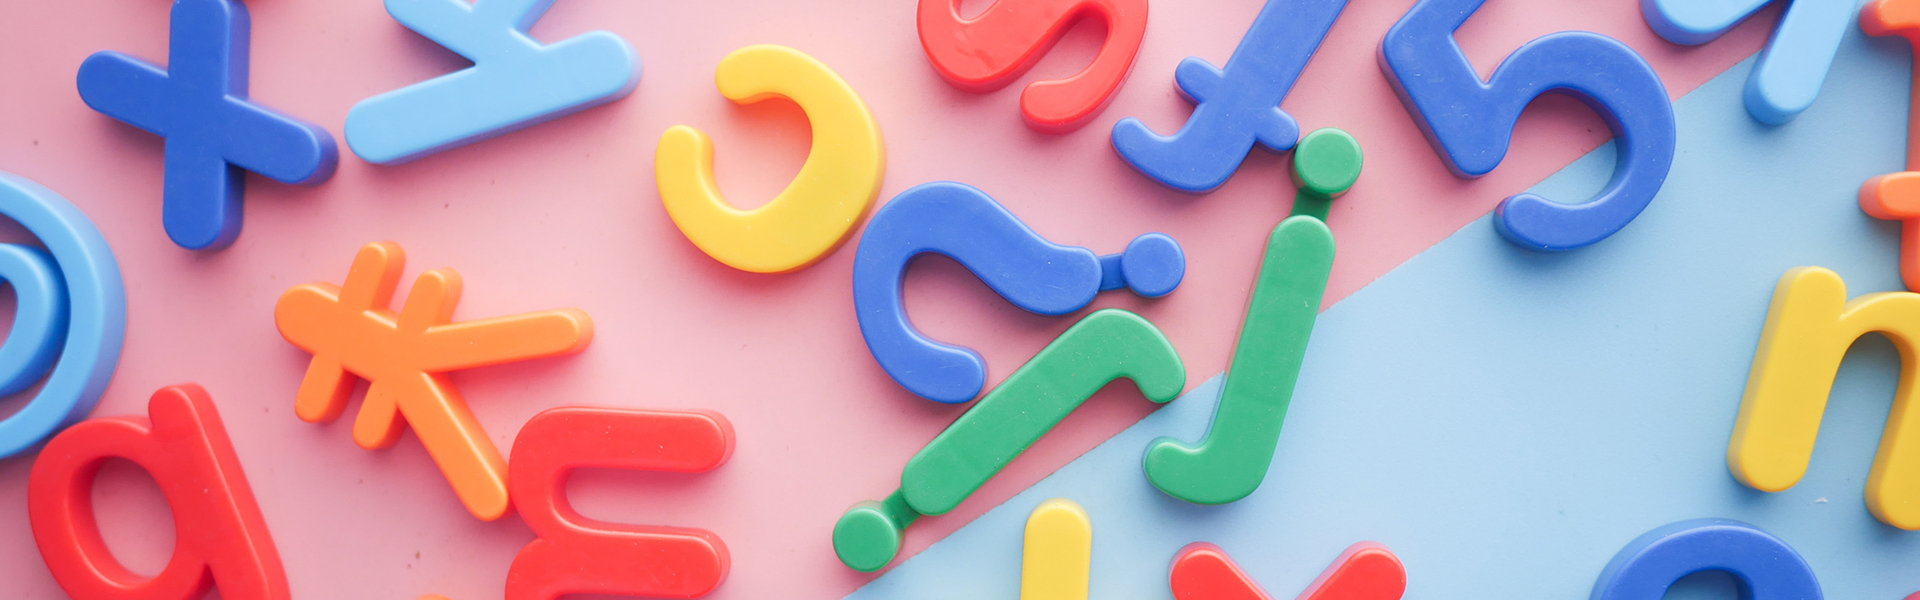 Brightly coloured plastic fridge letters on a pink background